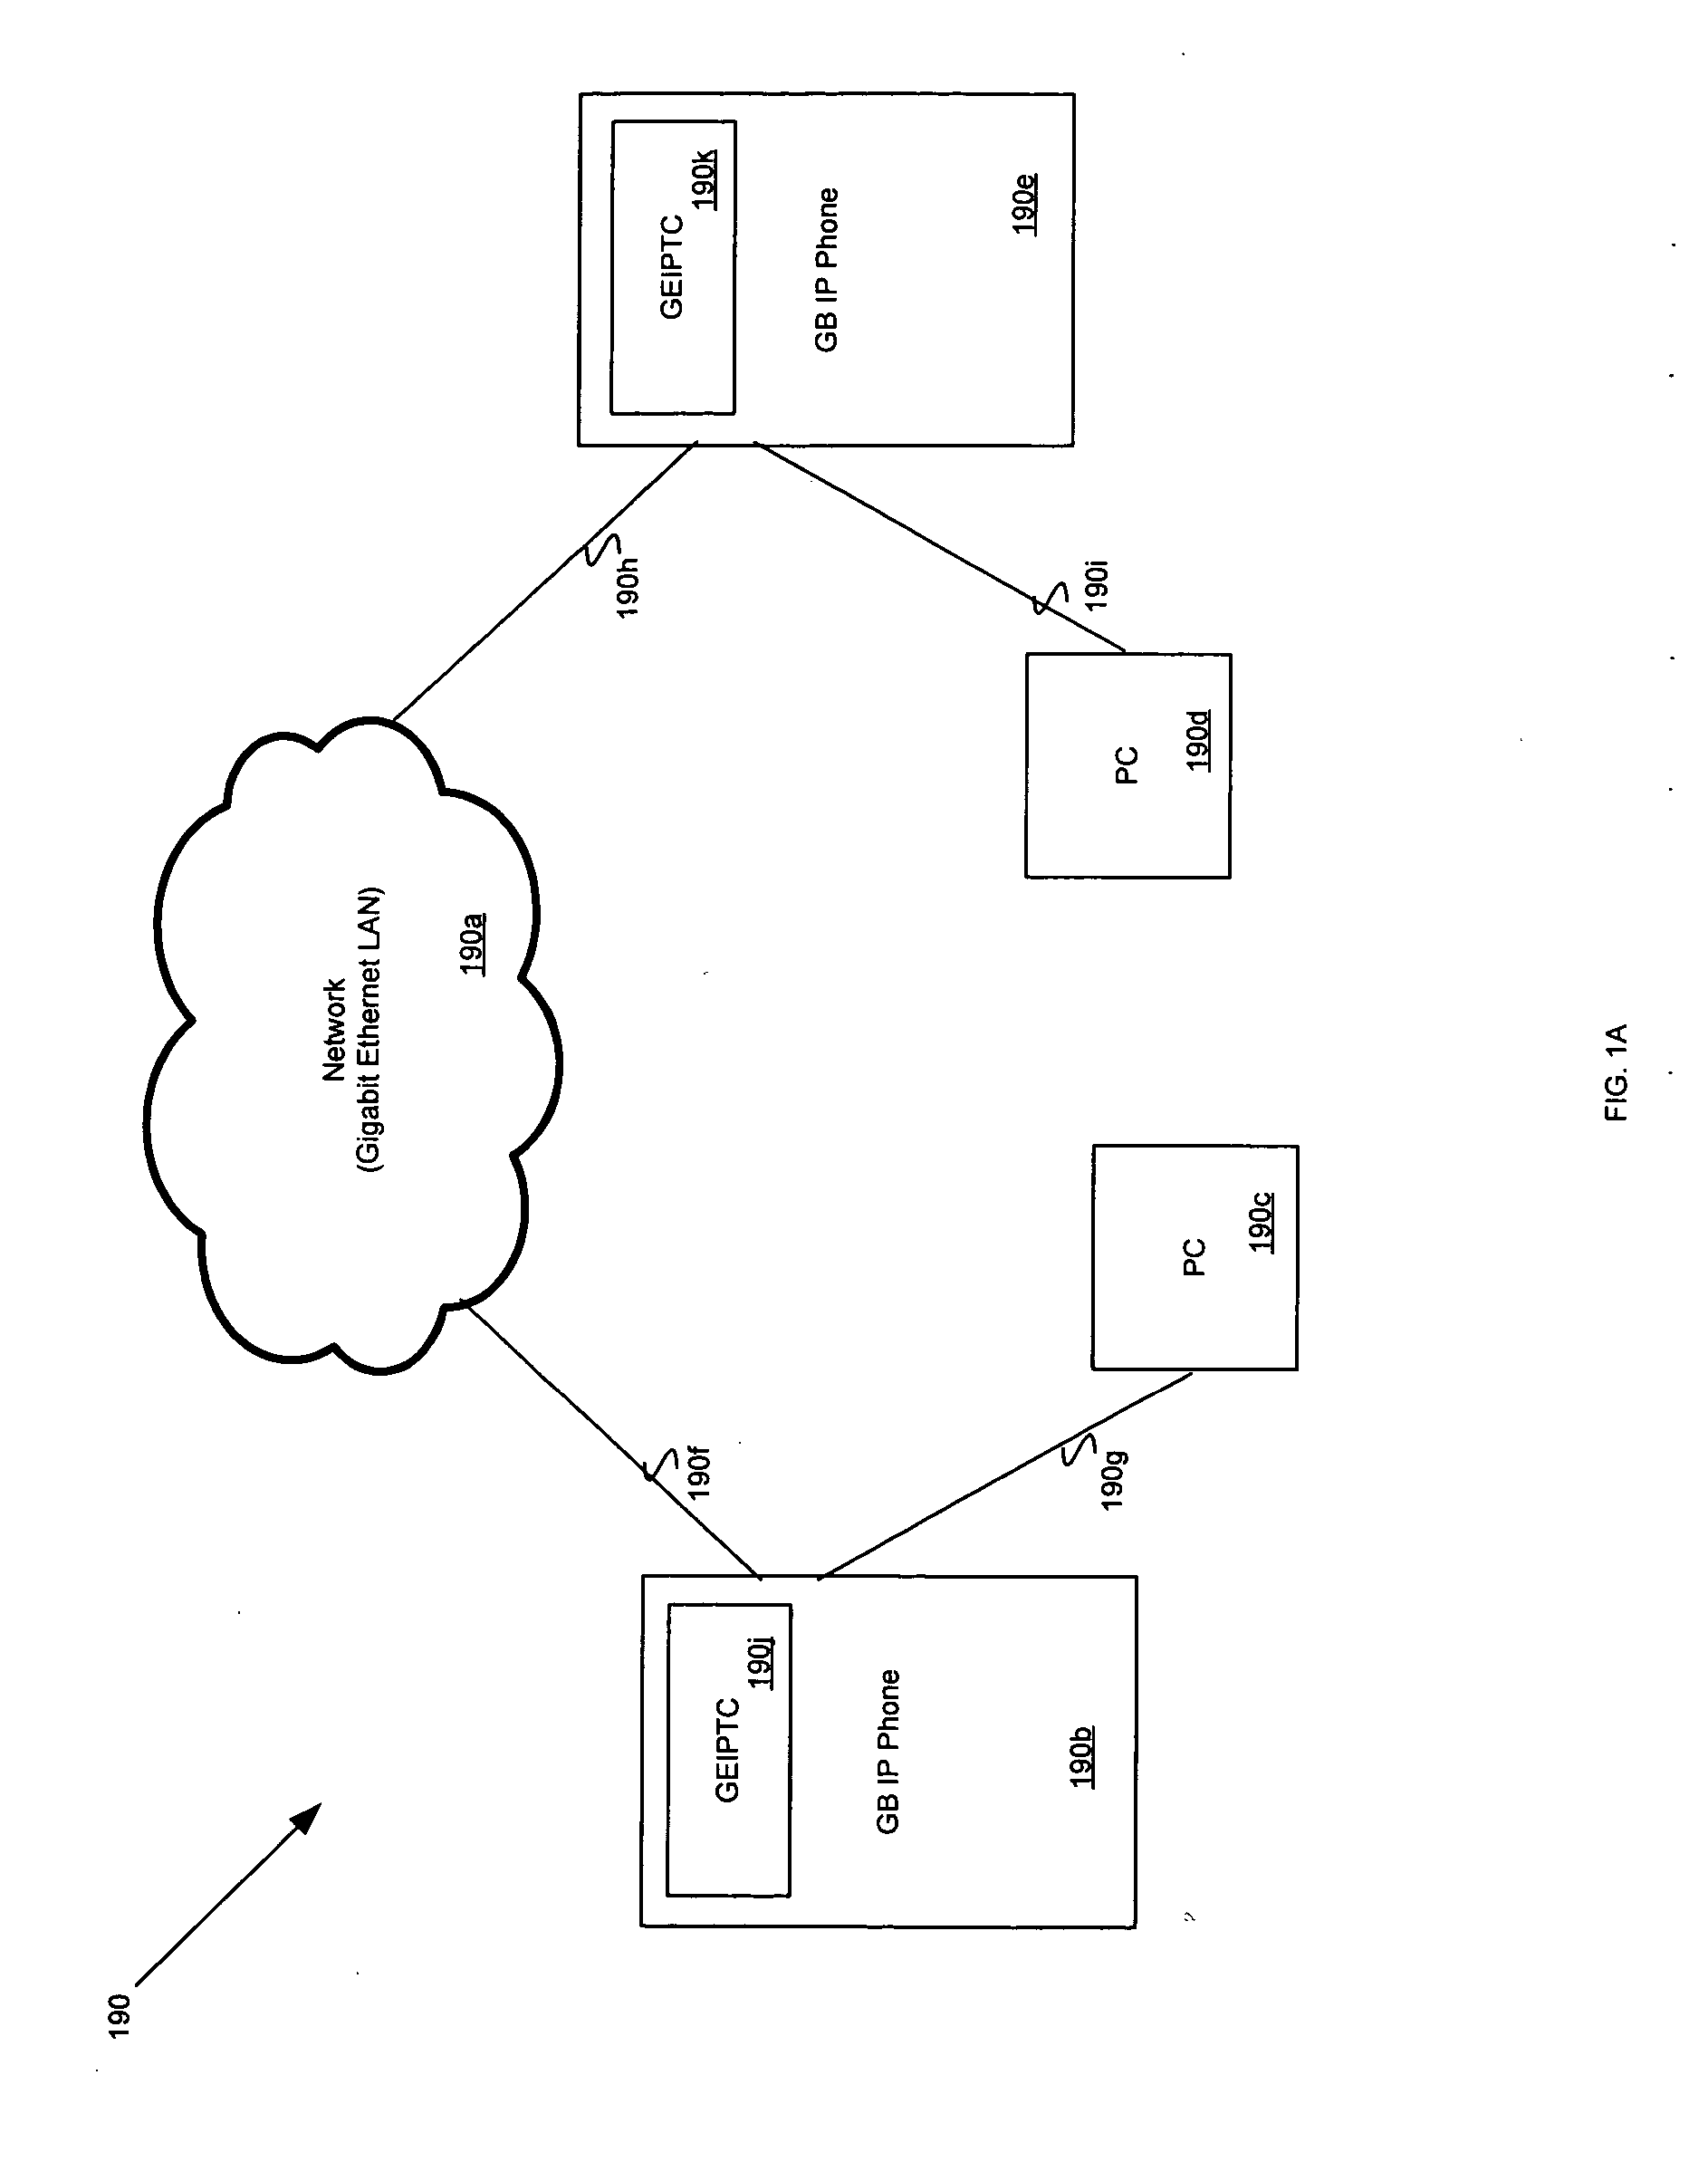 Method and system for a gigabit Ethernet IP telephone chip with no DSP core, which uses a RISC core with instruction extensions to support voice processing